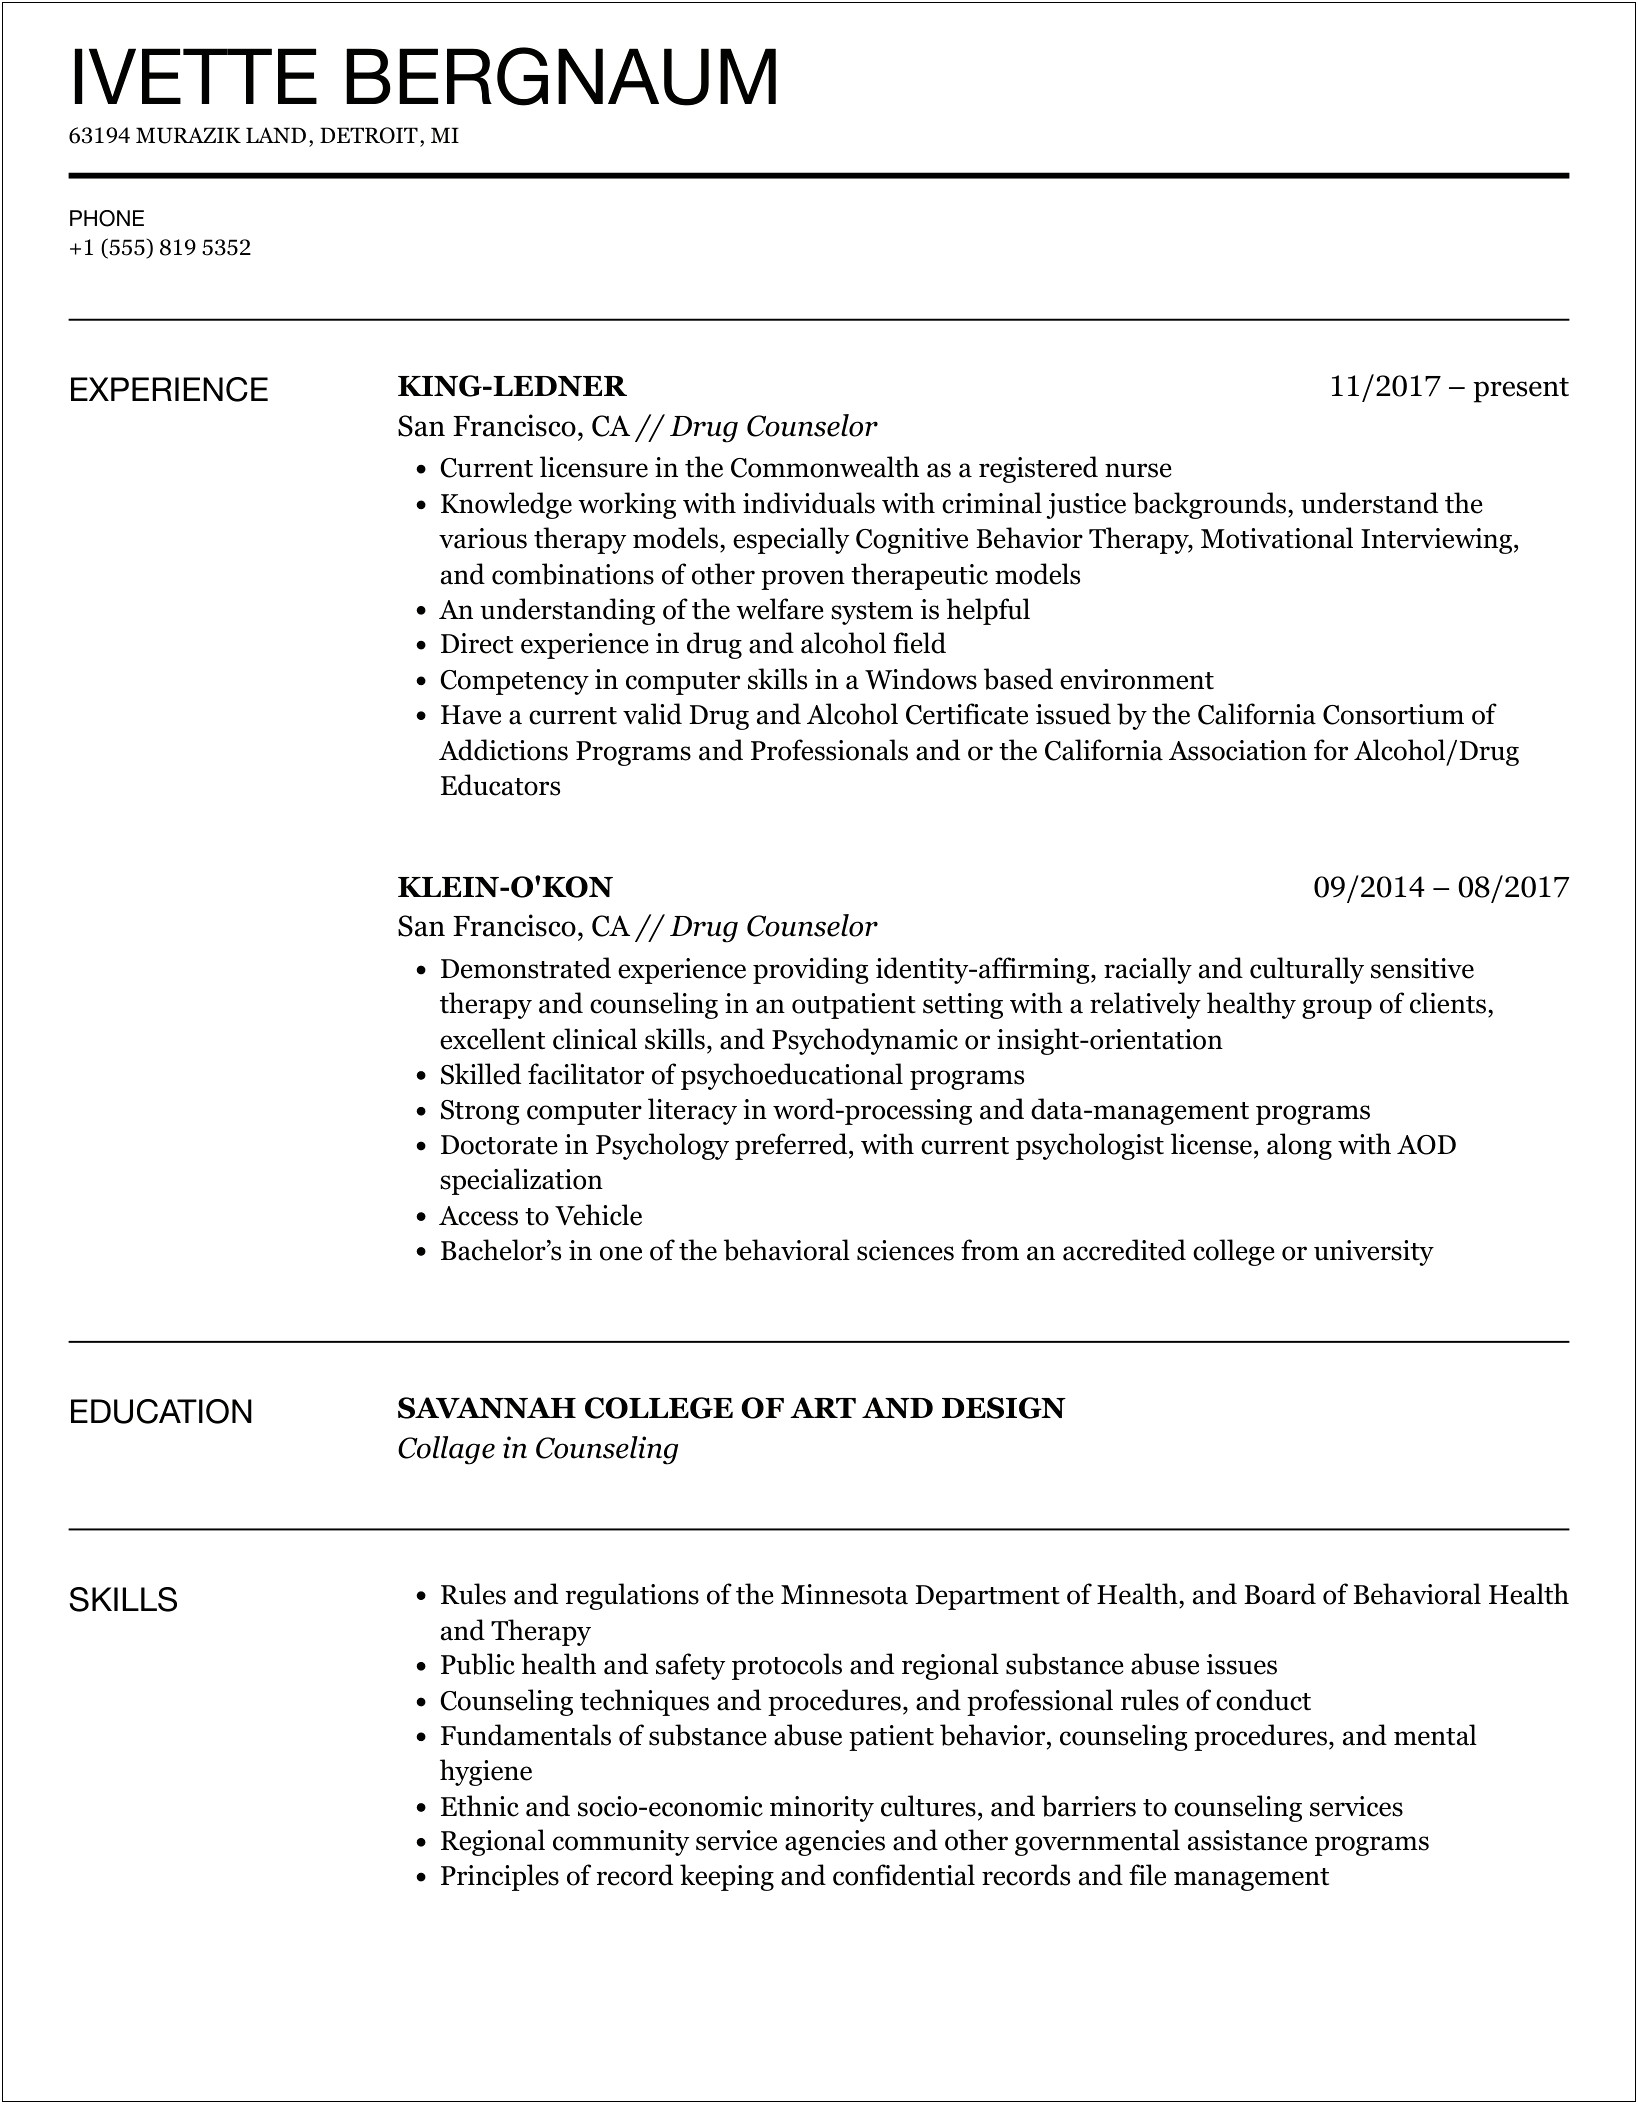 Resume Examples For Substance Abuse Counselor